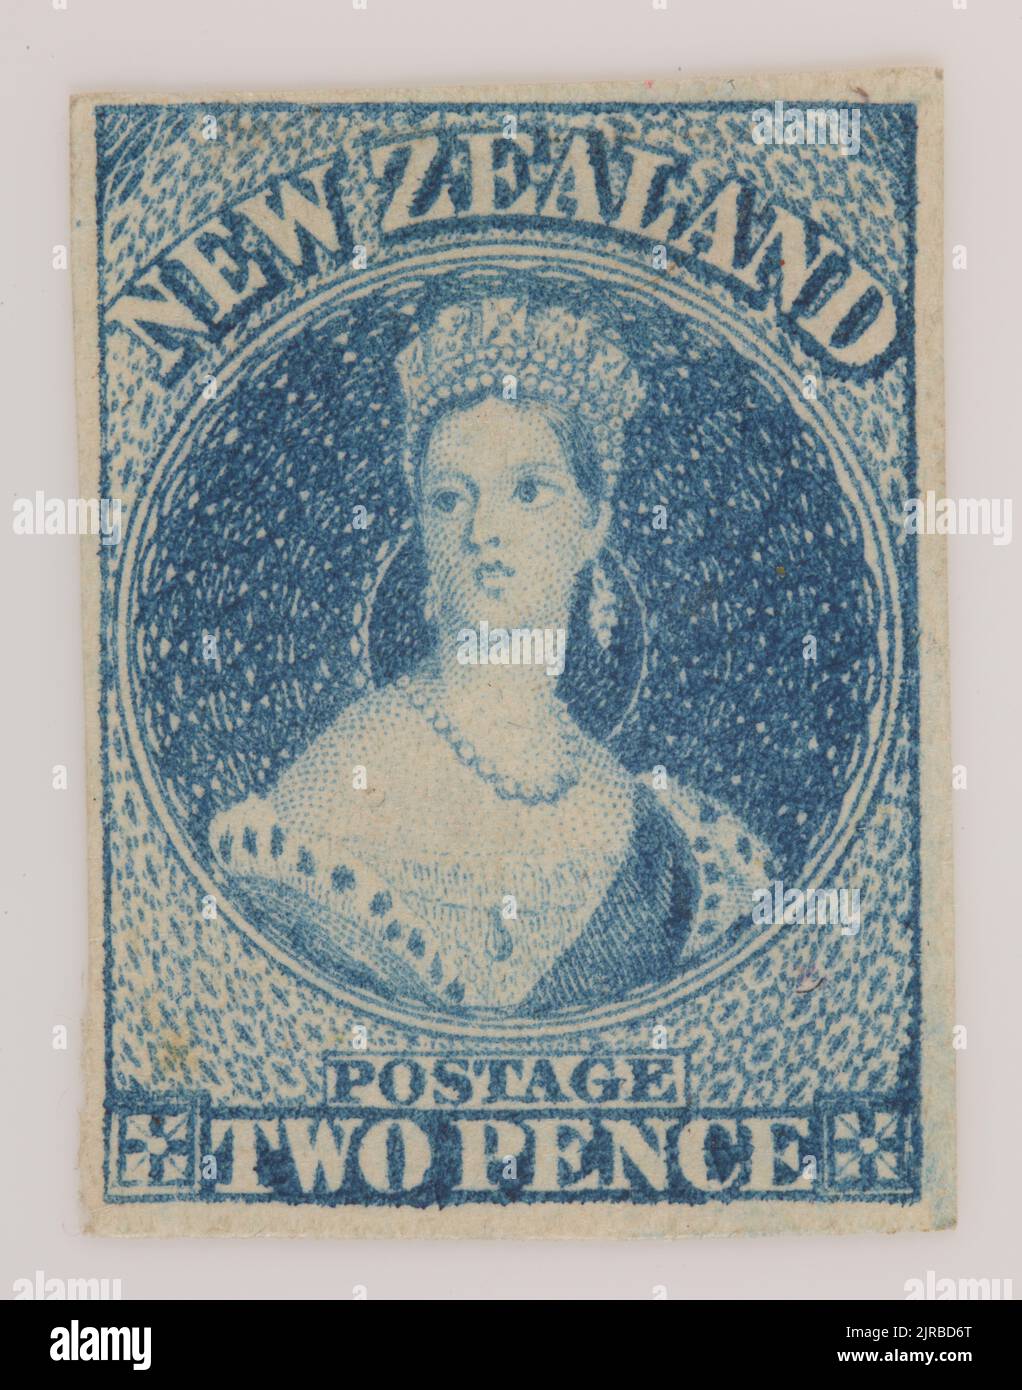 Issued two penny 'Full-Face Queen' [Chalon Head] definitive stamp, 1871-1874, New Zealand, by John Davies, William Humphrys. The New Zealand Post Museum Collection, Gift of New Zealand Post Ltd., 1992. Stock Photo